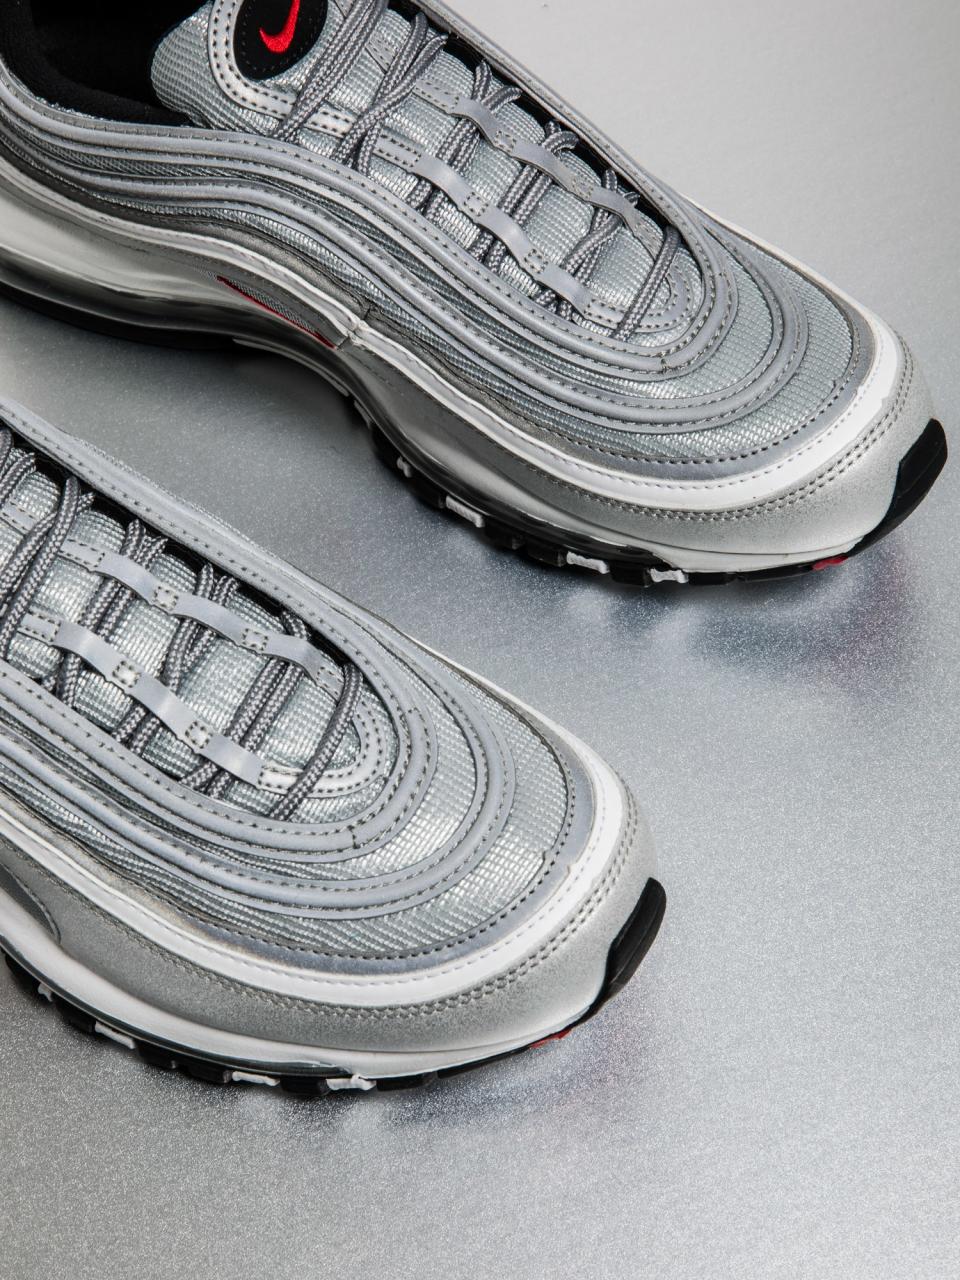 The divisive Air Max style is speeding back into your sneaker rotation.